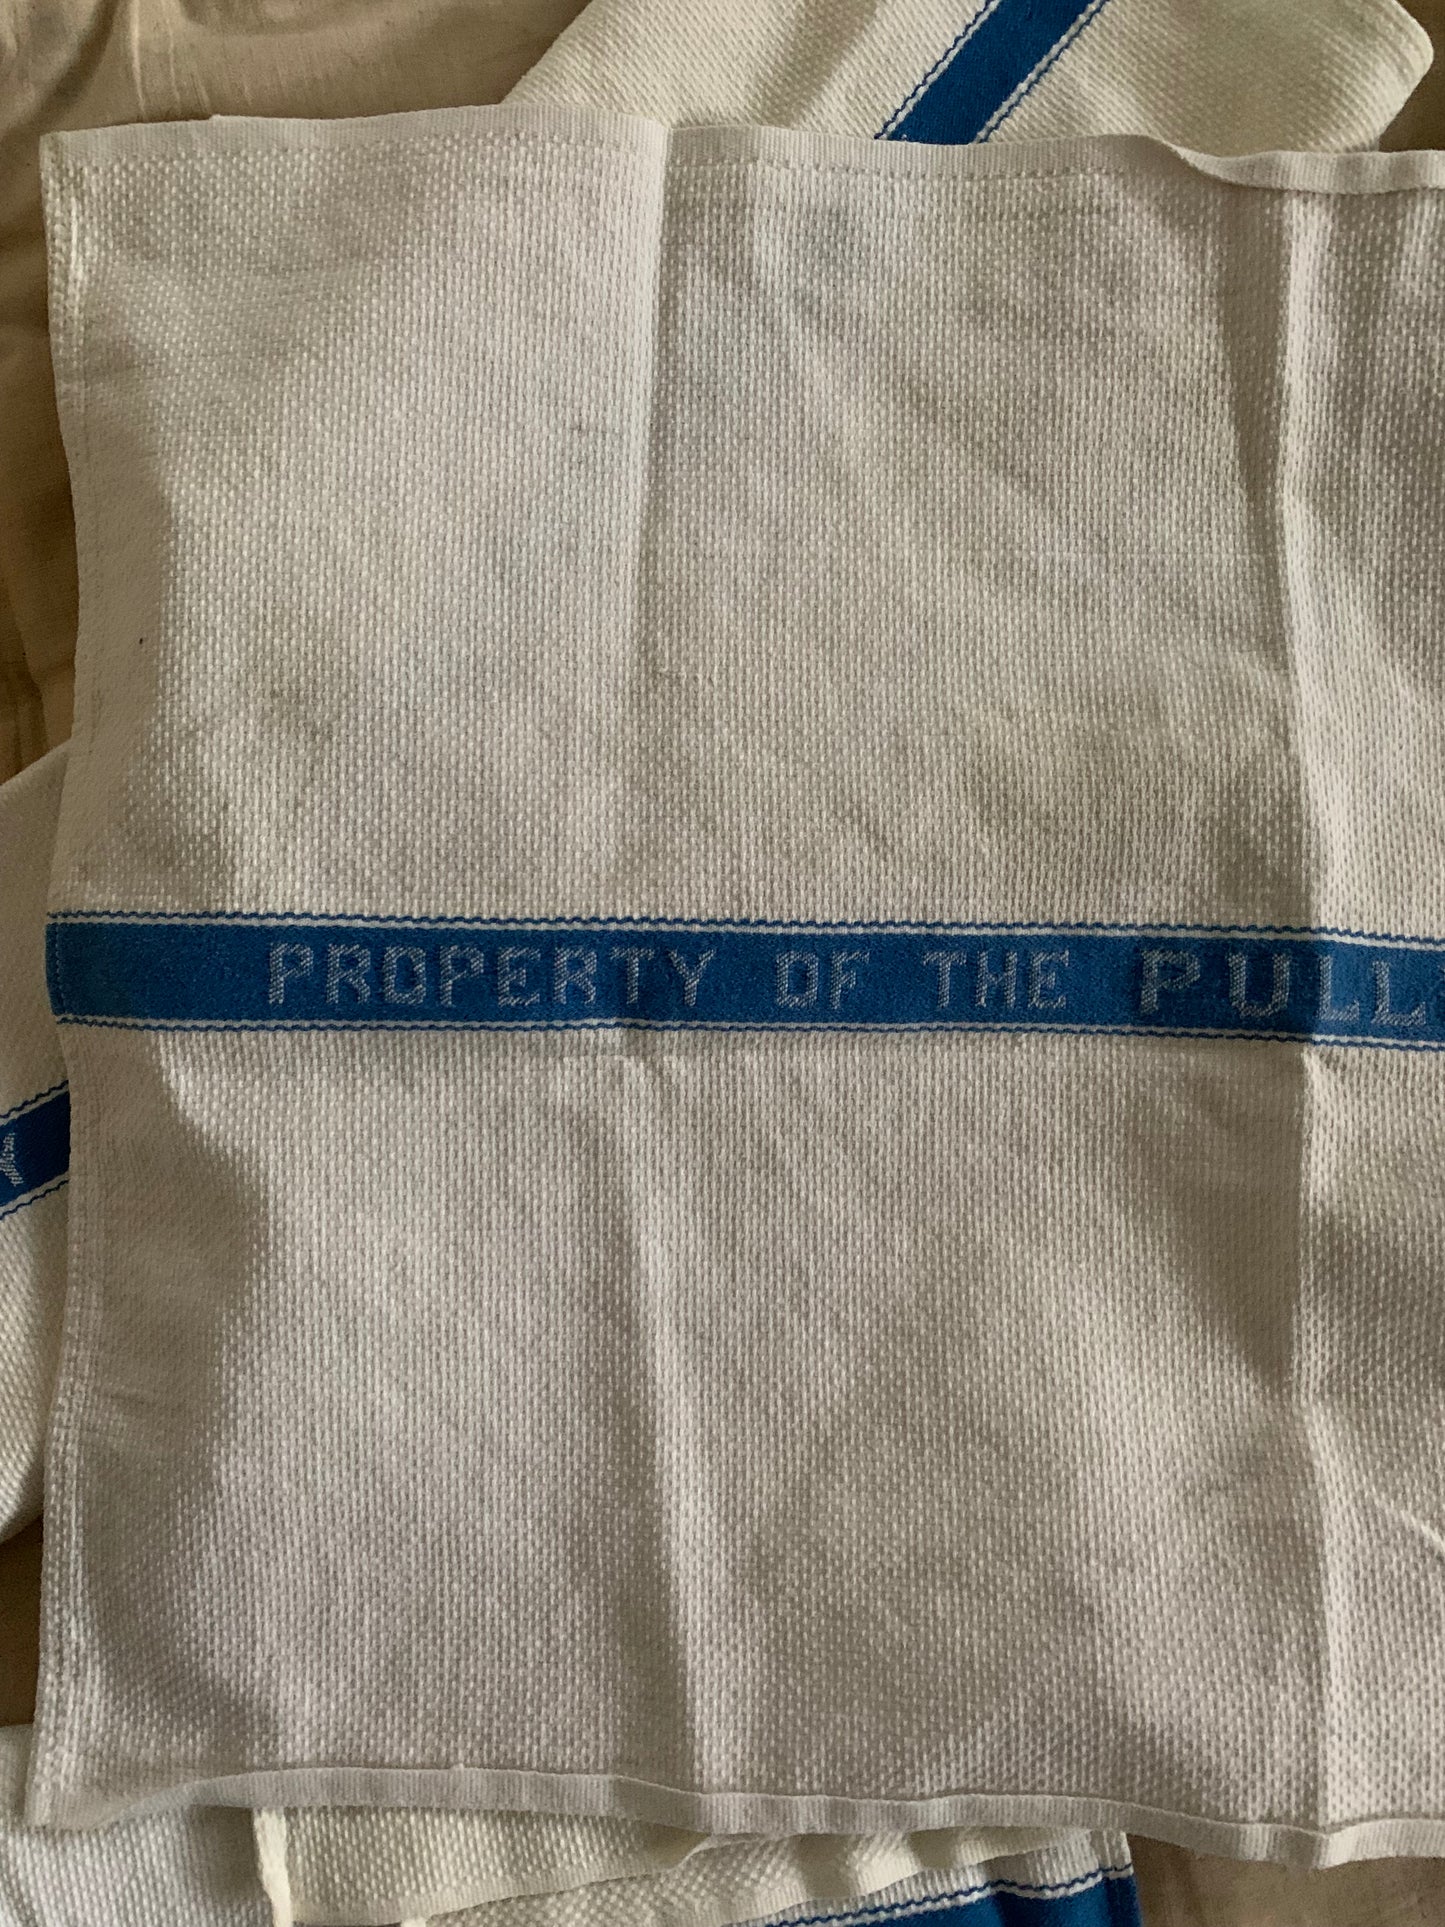 Antique “property of the Pullman company” hand towel from railroad